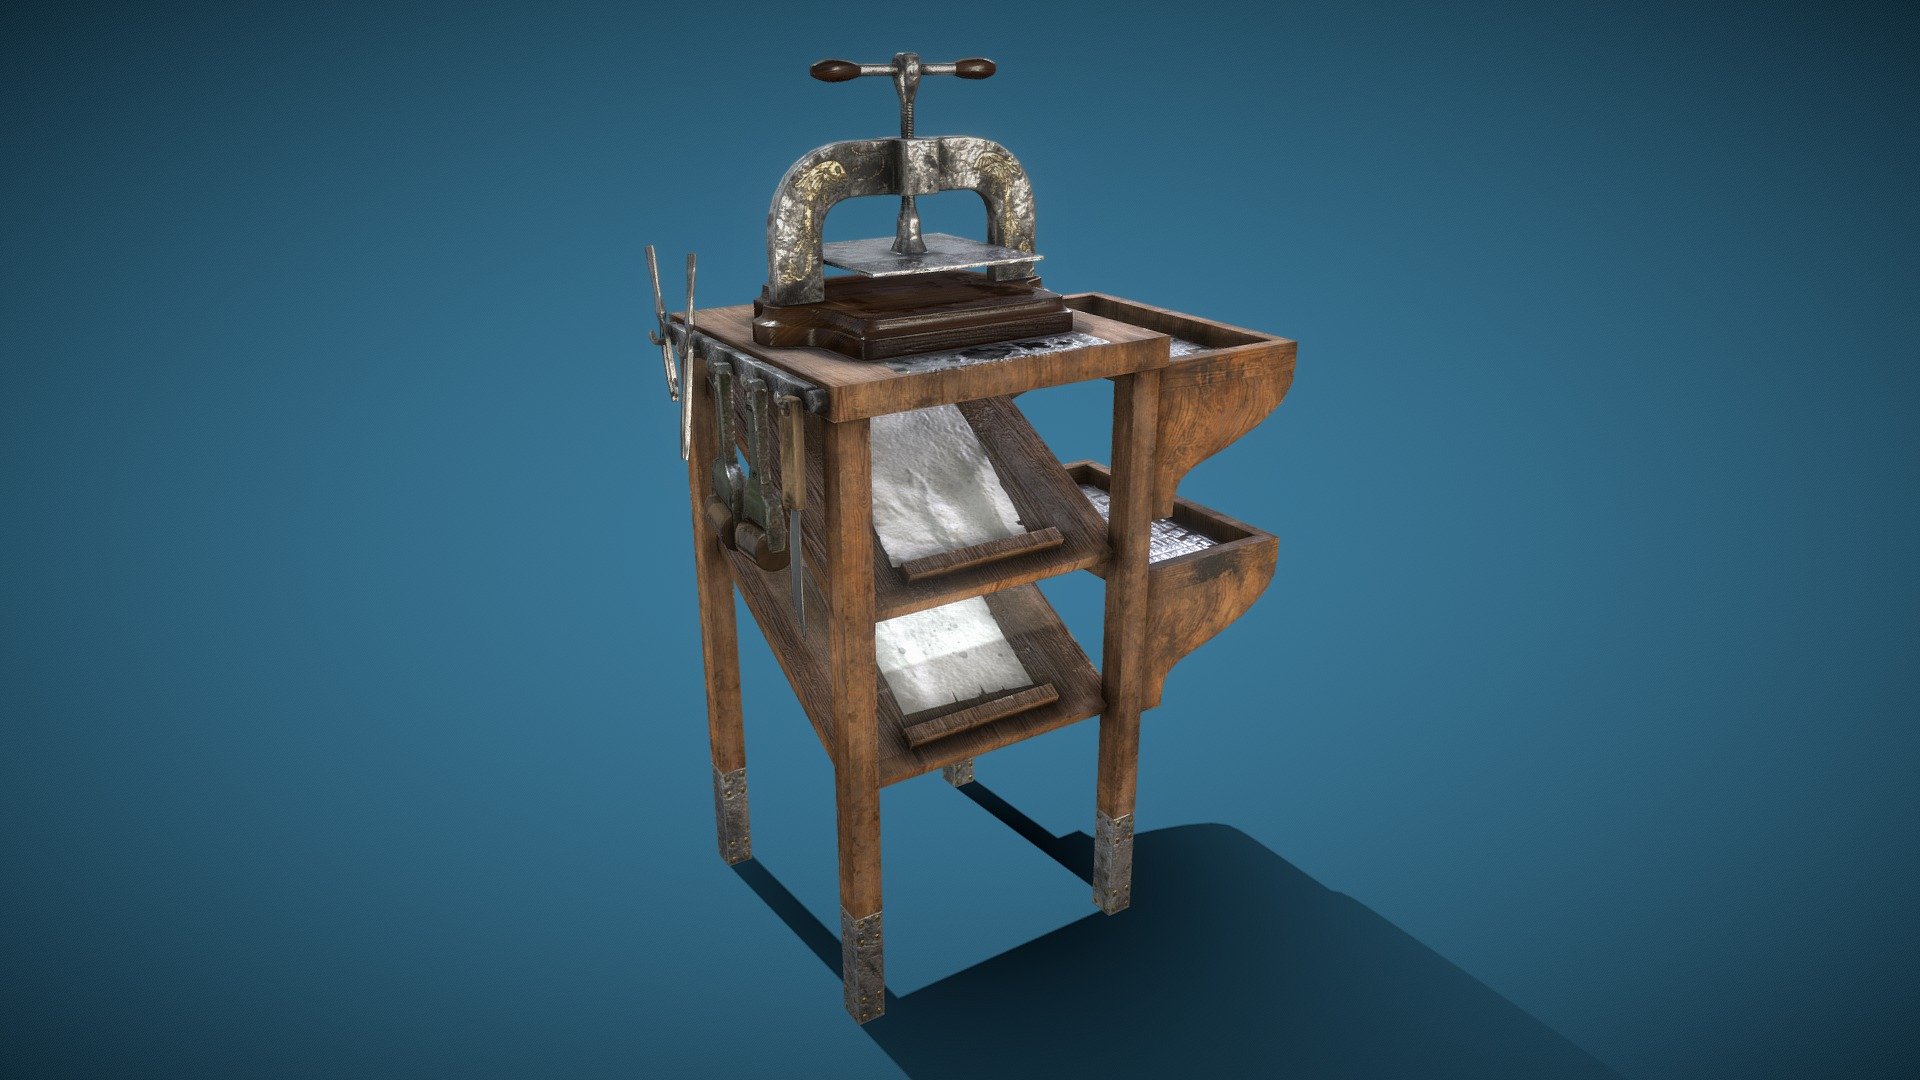 Custom-Order from ATLAS Server AquariusRP



**The wodden rack with the printingpress and the appropriate tools, paper and lead type is every good pirates friend - why?
Because being an informed captain while reading maps, stars and letters is extremely important! Be a clever Captain - use a printingpress!



4K Texture (4096x4096px)



LowPoly-Asset for Video &amp;/or Games



Made with: 3Ds Max, zBrush, Substance Painter, Photoshop - Fantasy Printing Press - Buy Royalty Free 3D model by MDSDesign 3d model